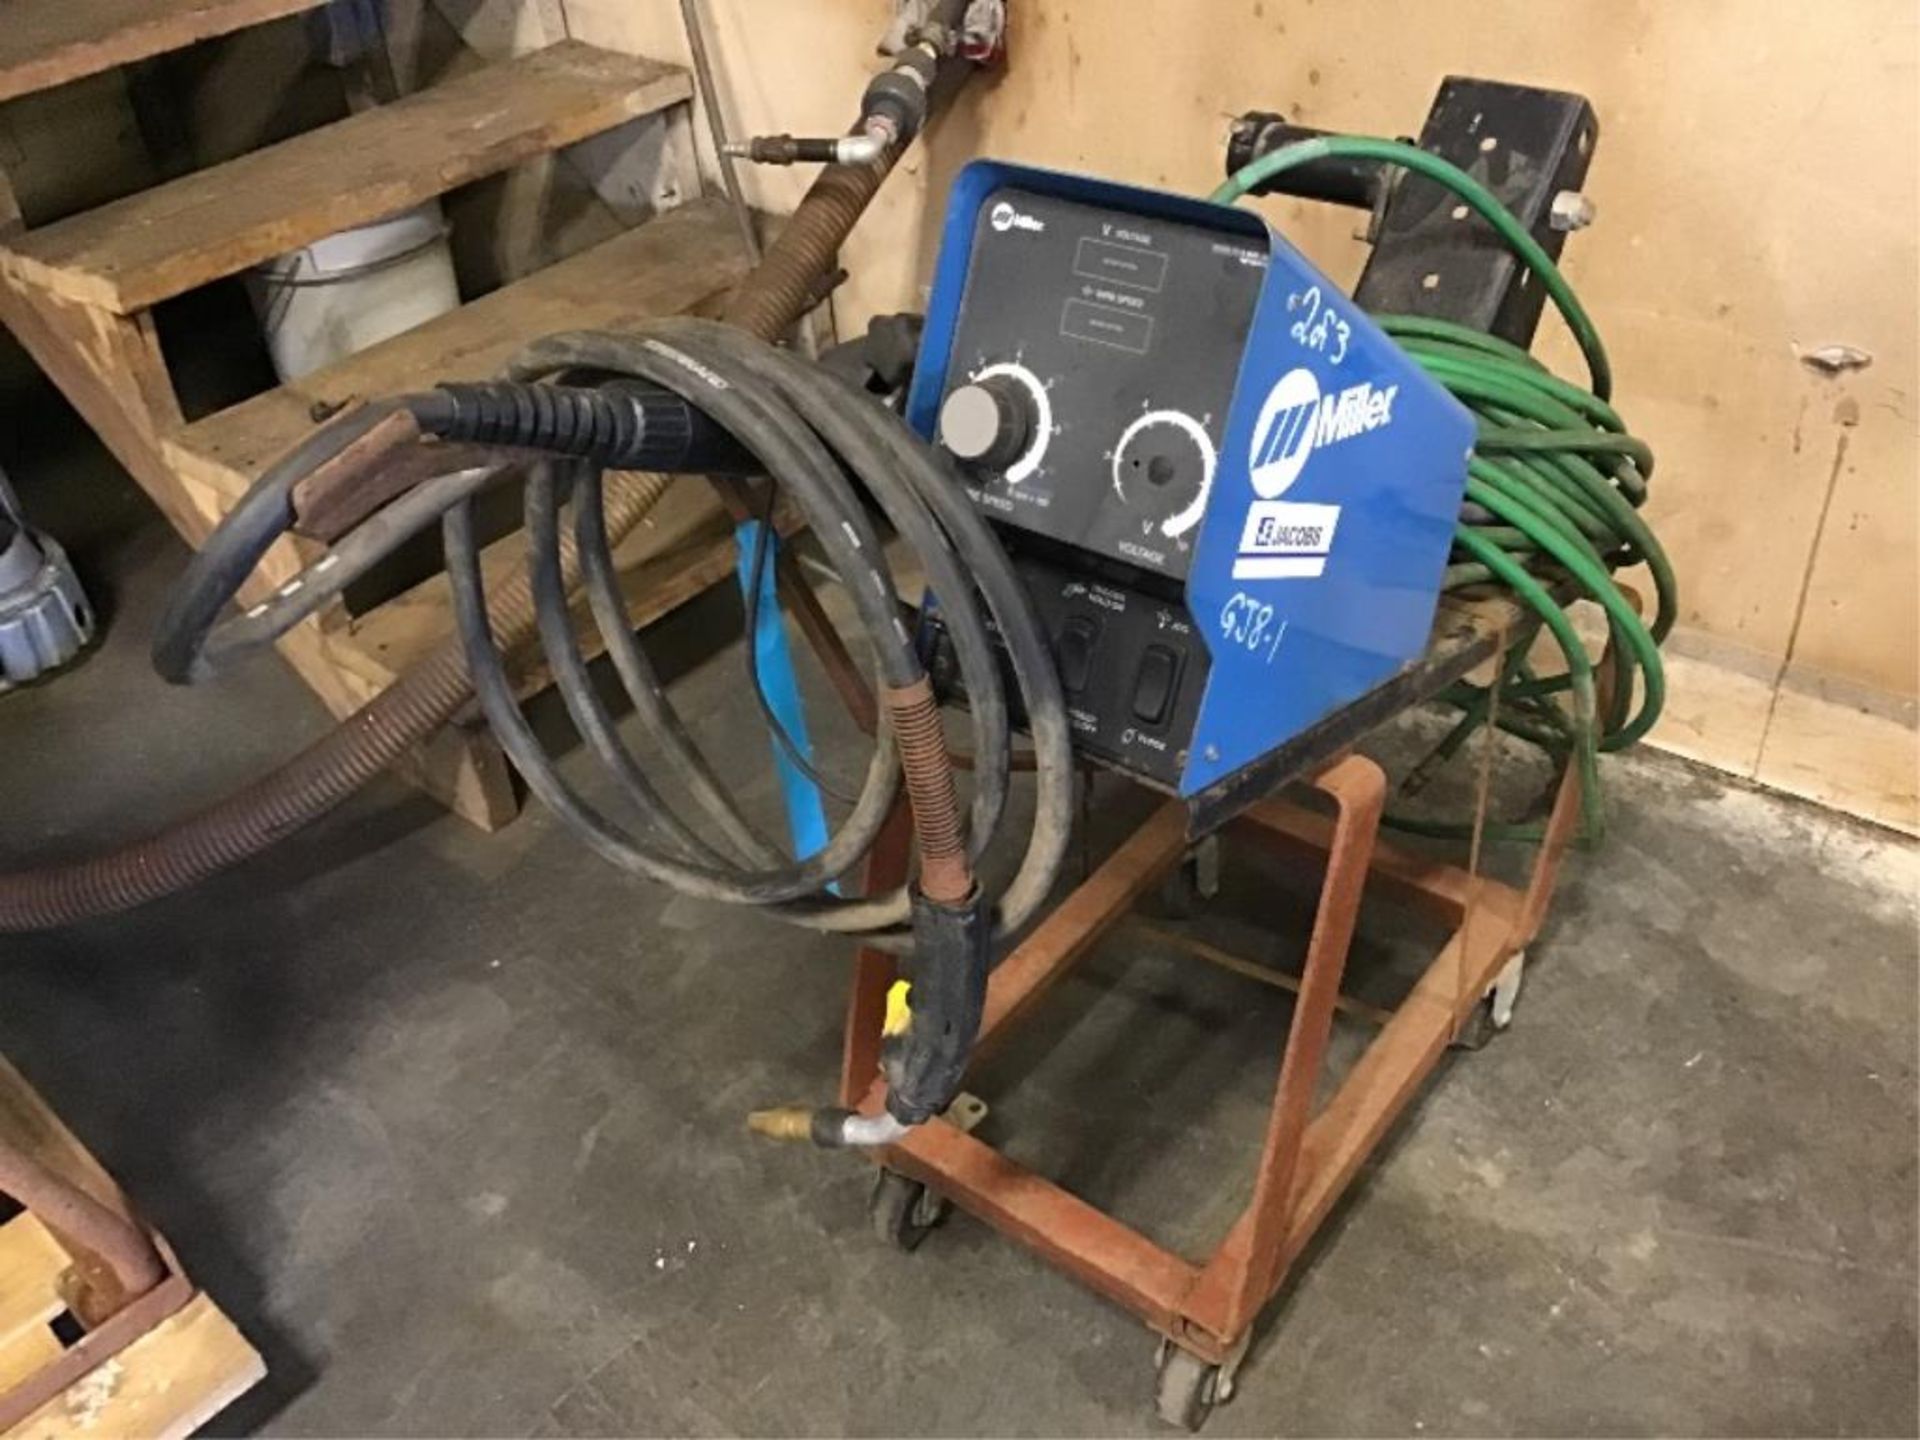 Miller 70 Series 24V Wire Feeder w/Wires & Cart This unit did not work as anticipated. Consignor doe